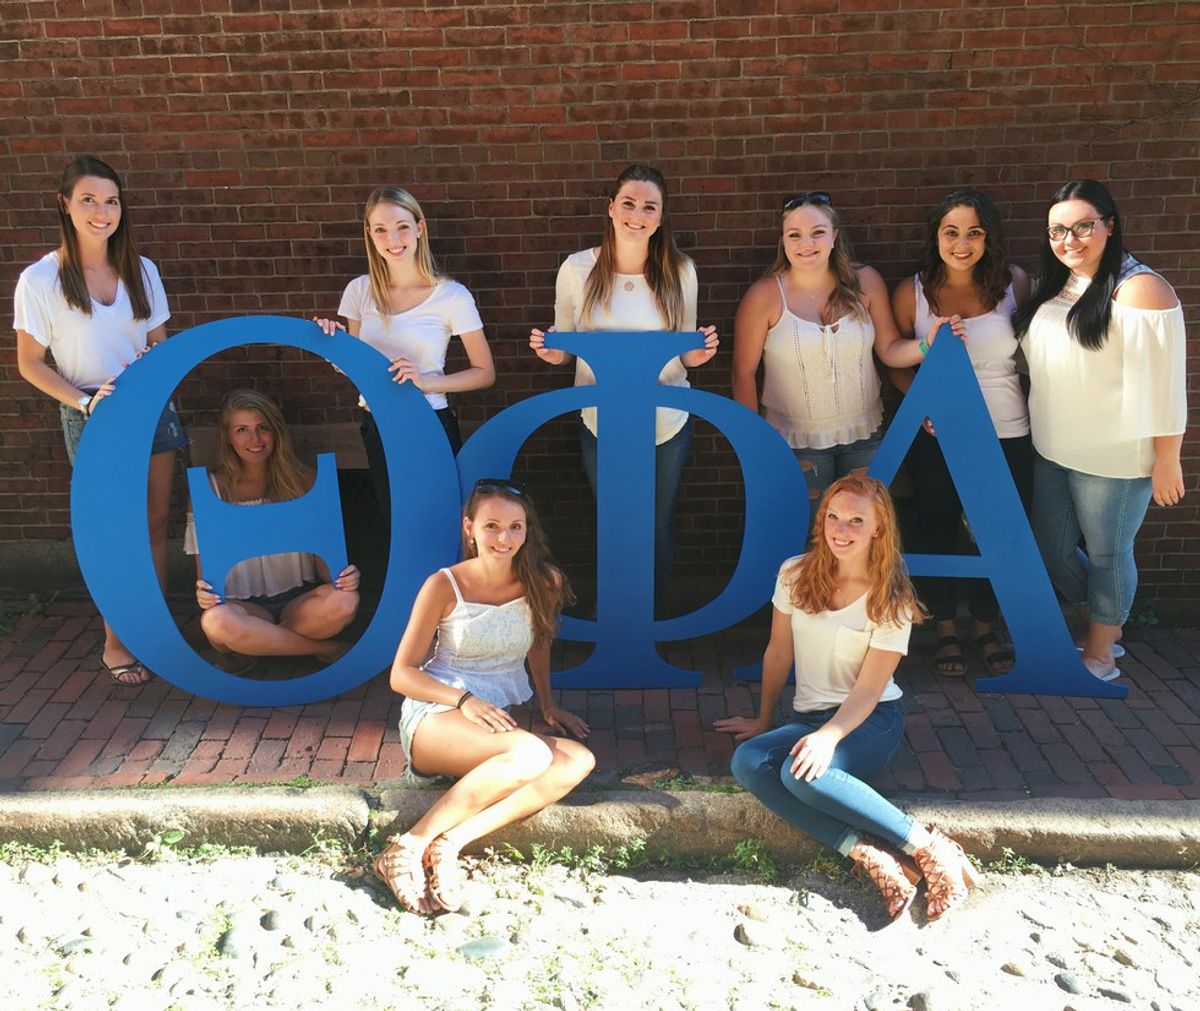 5 Things You Think Know About Sororities